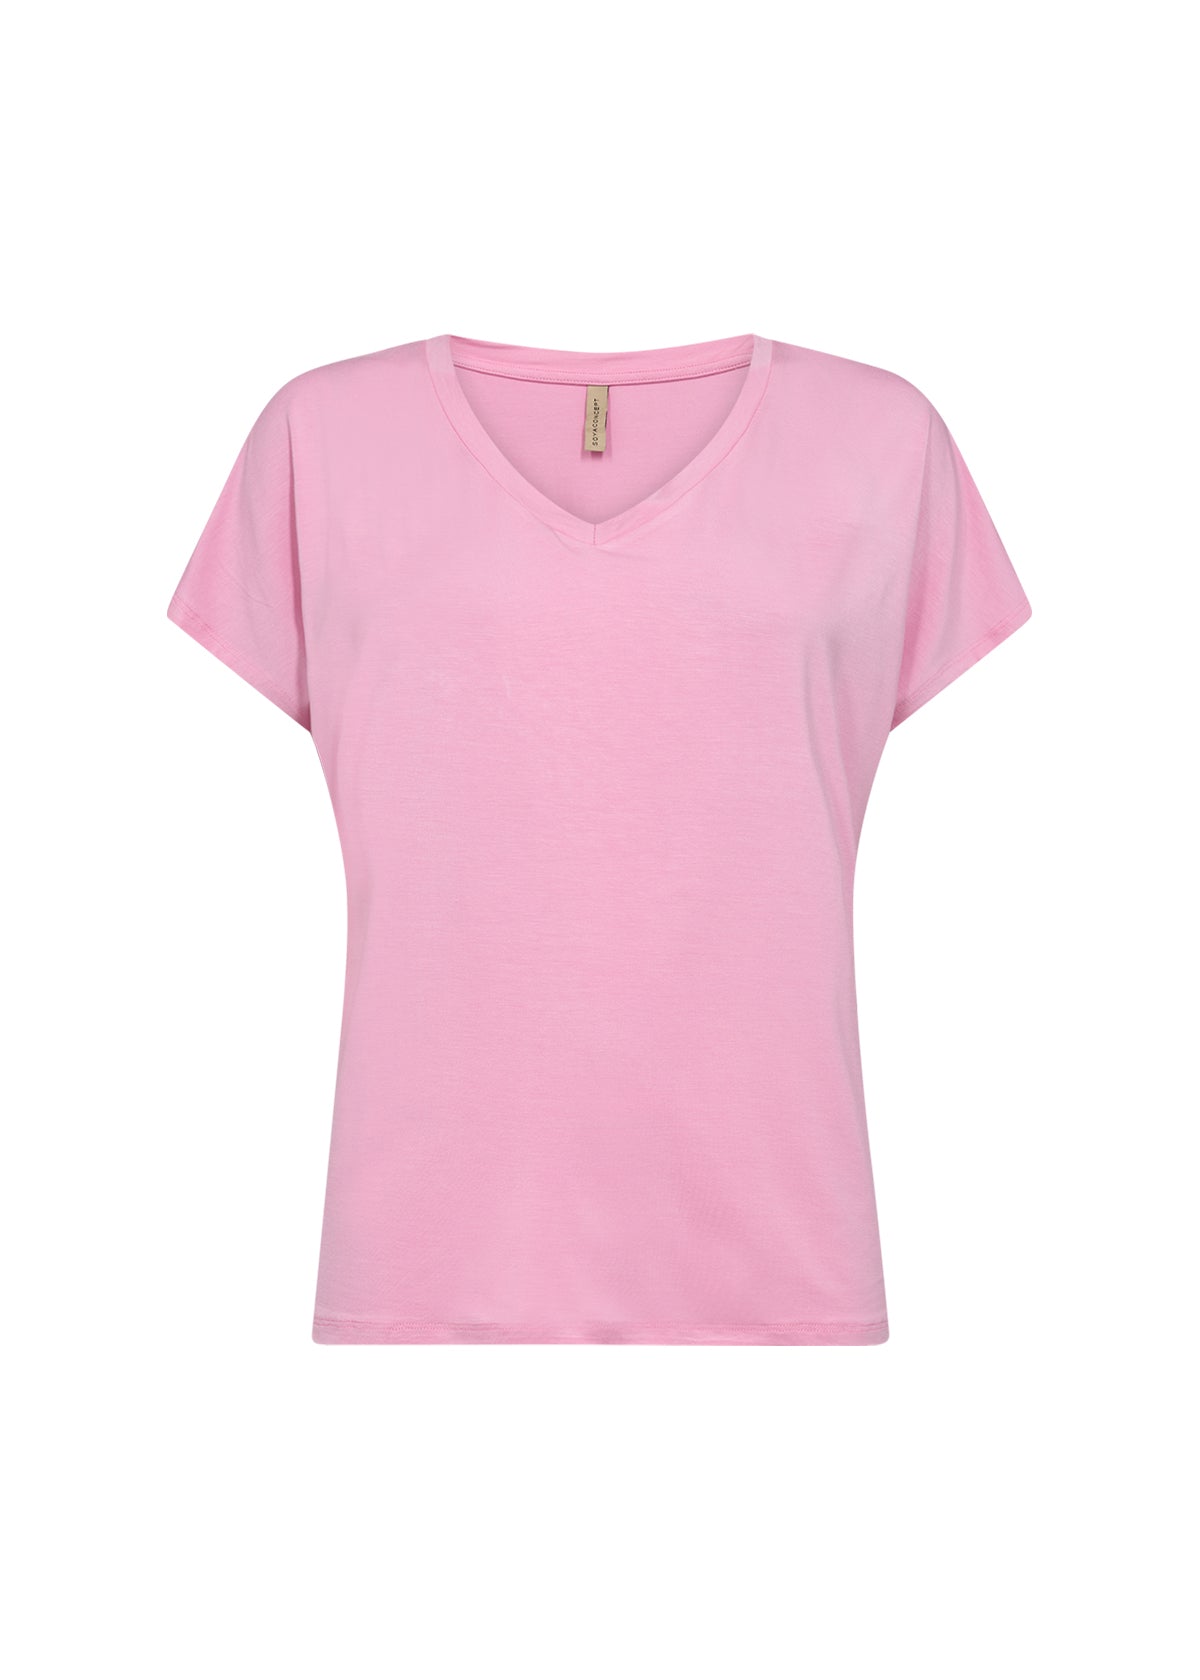 Soya Concept Marcia 32 Tee In Pink 29028